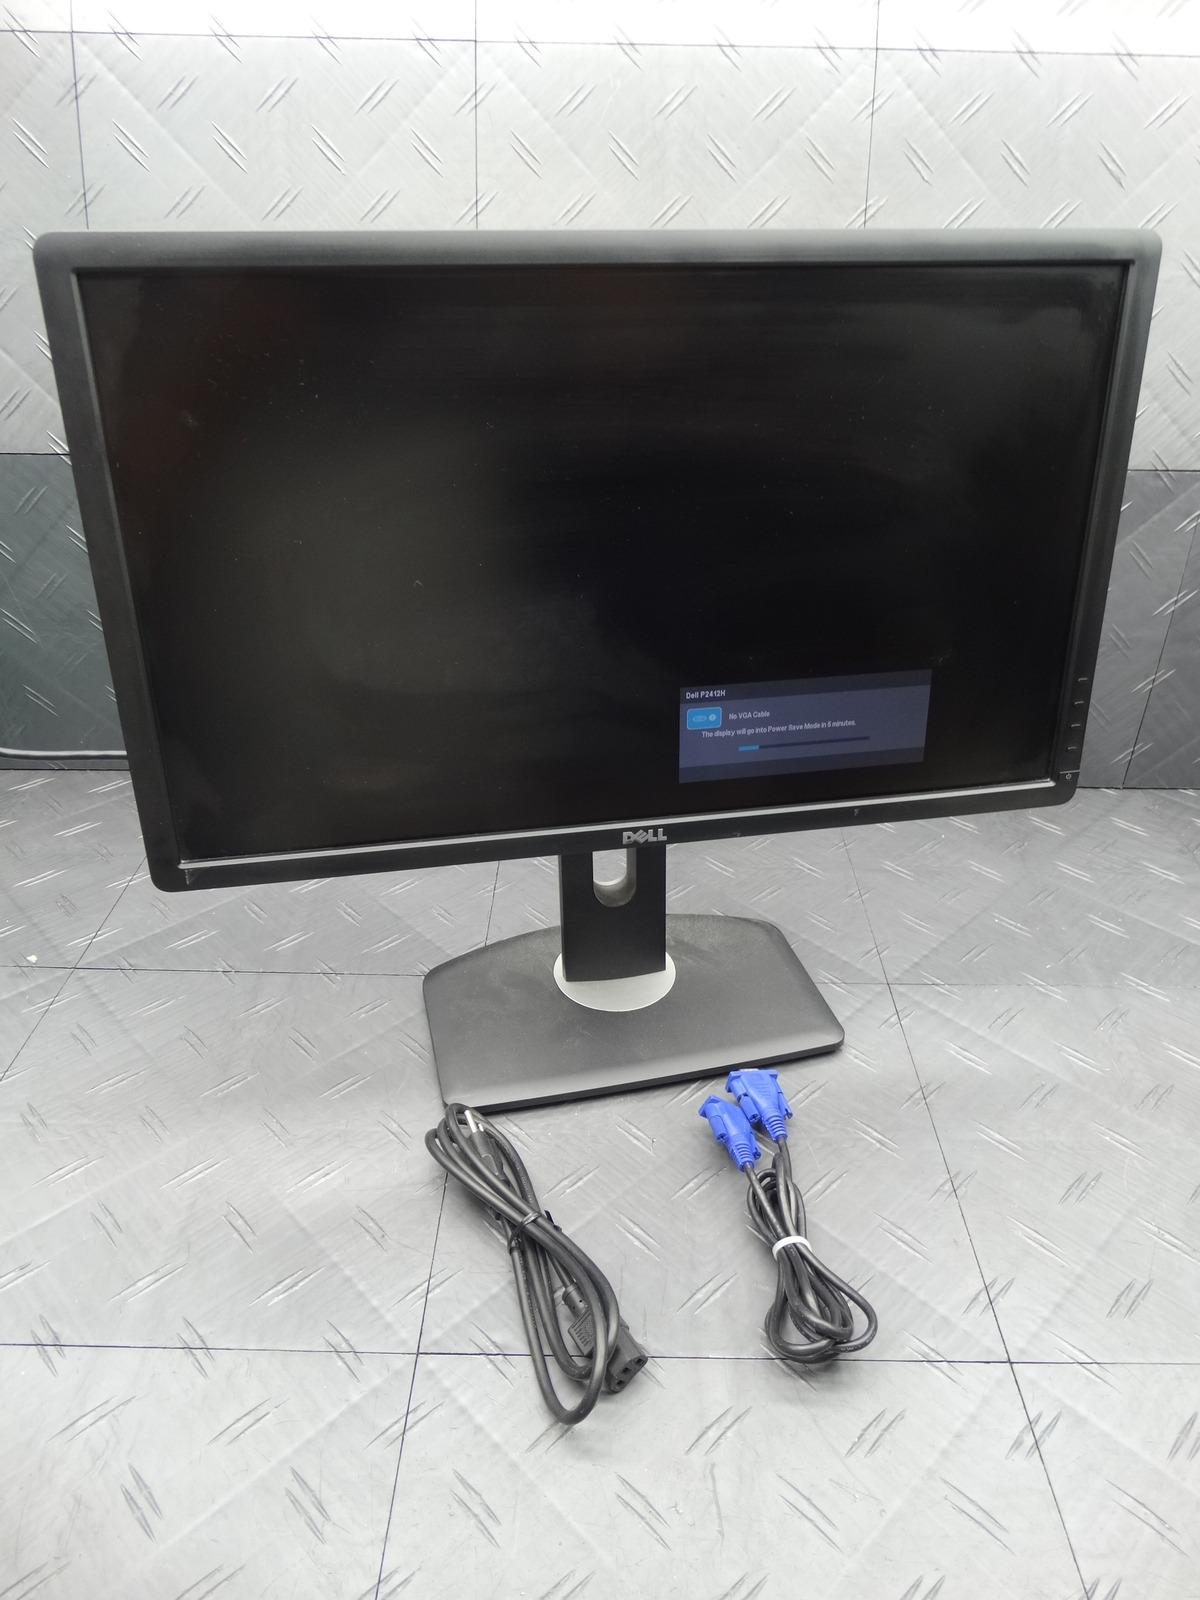 Dell 22in Monitor HD 1080p P2412Hb Black + Power Cable